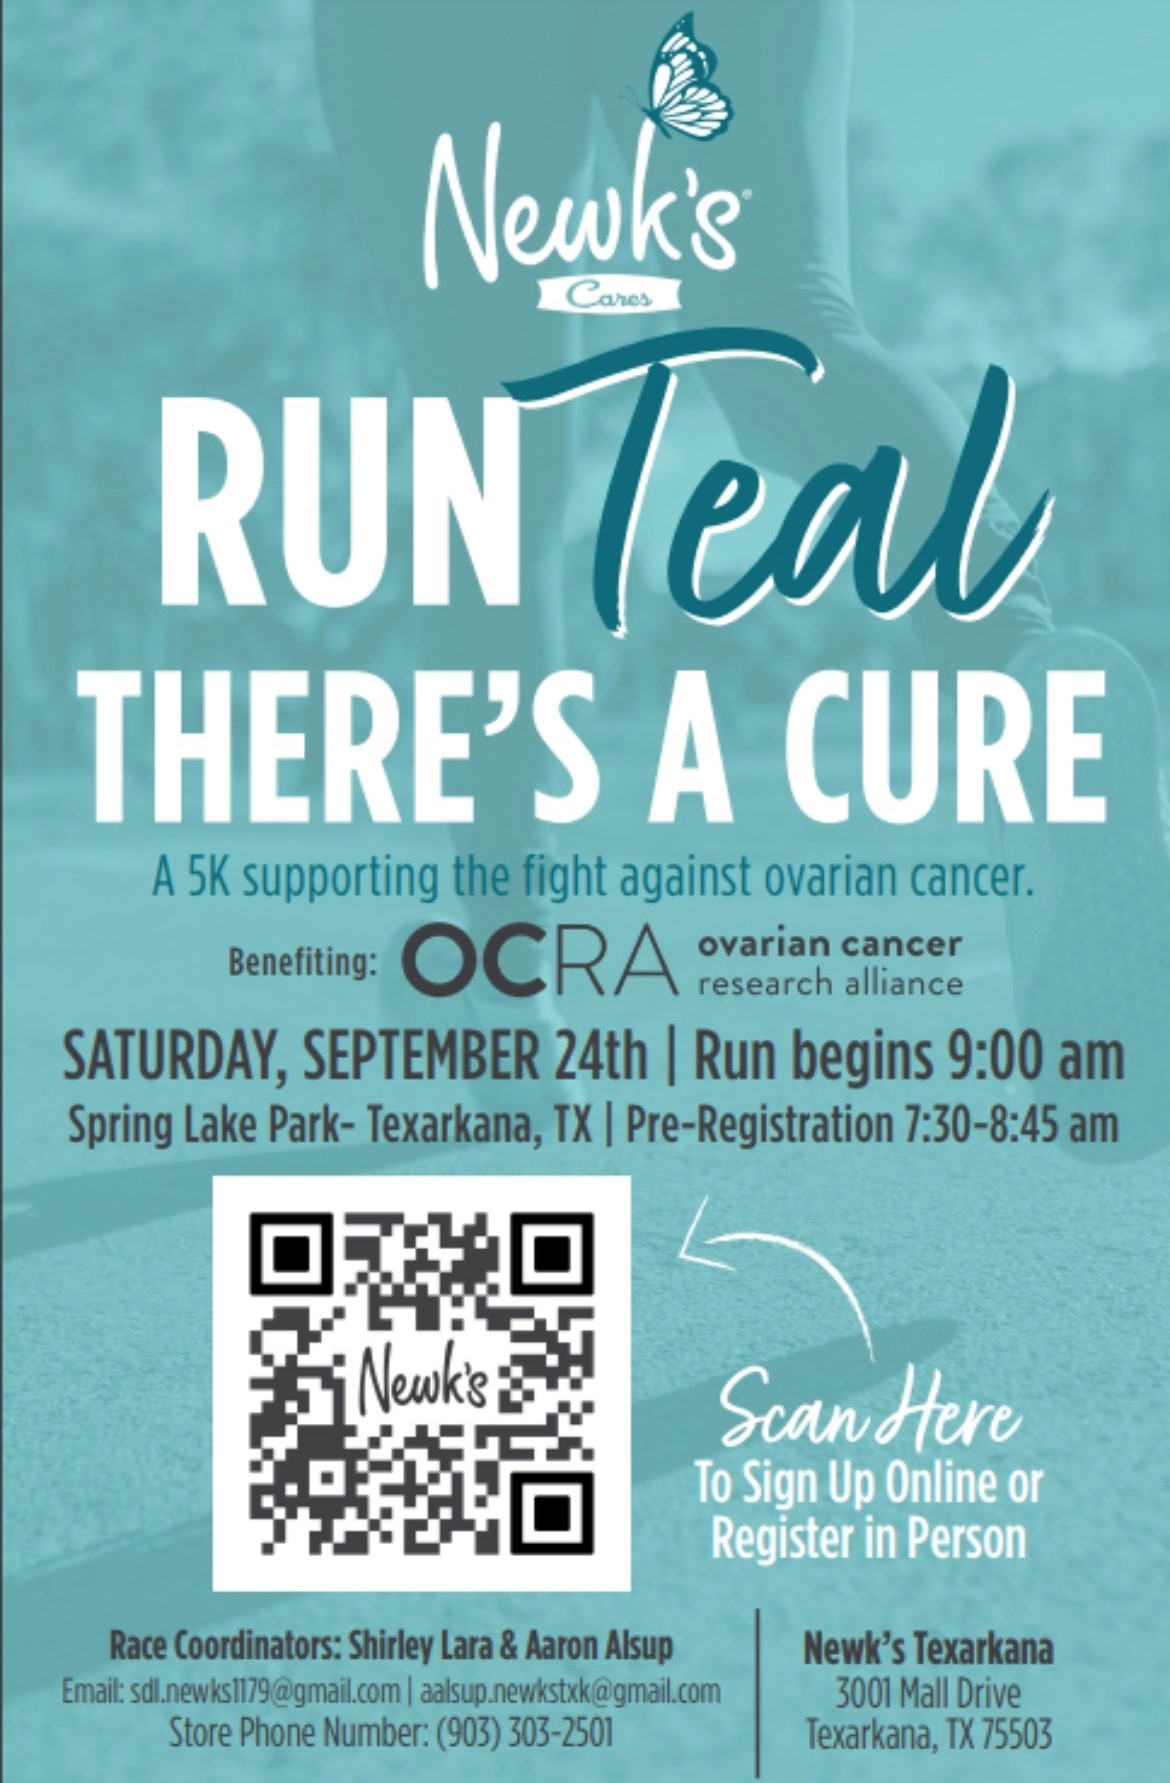 Newk's Cares Run Teal There's a Cure, September 24 2022, Spring Lake Park, Texarkana